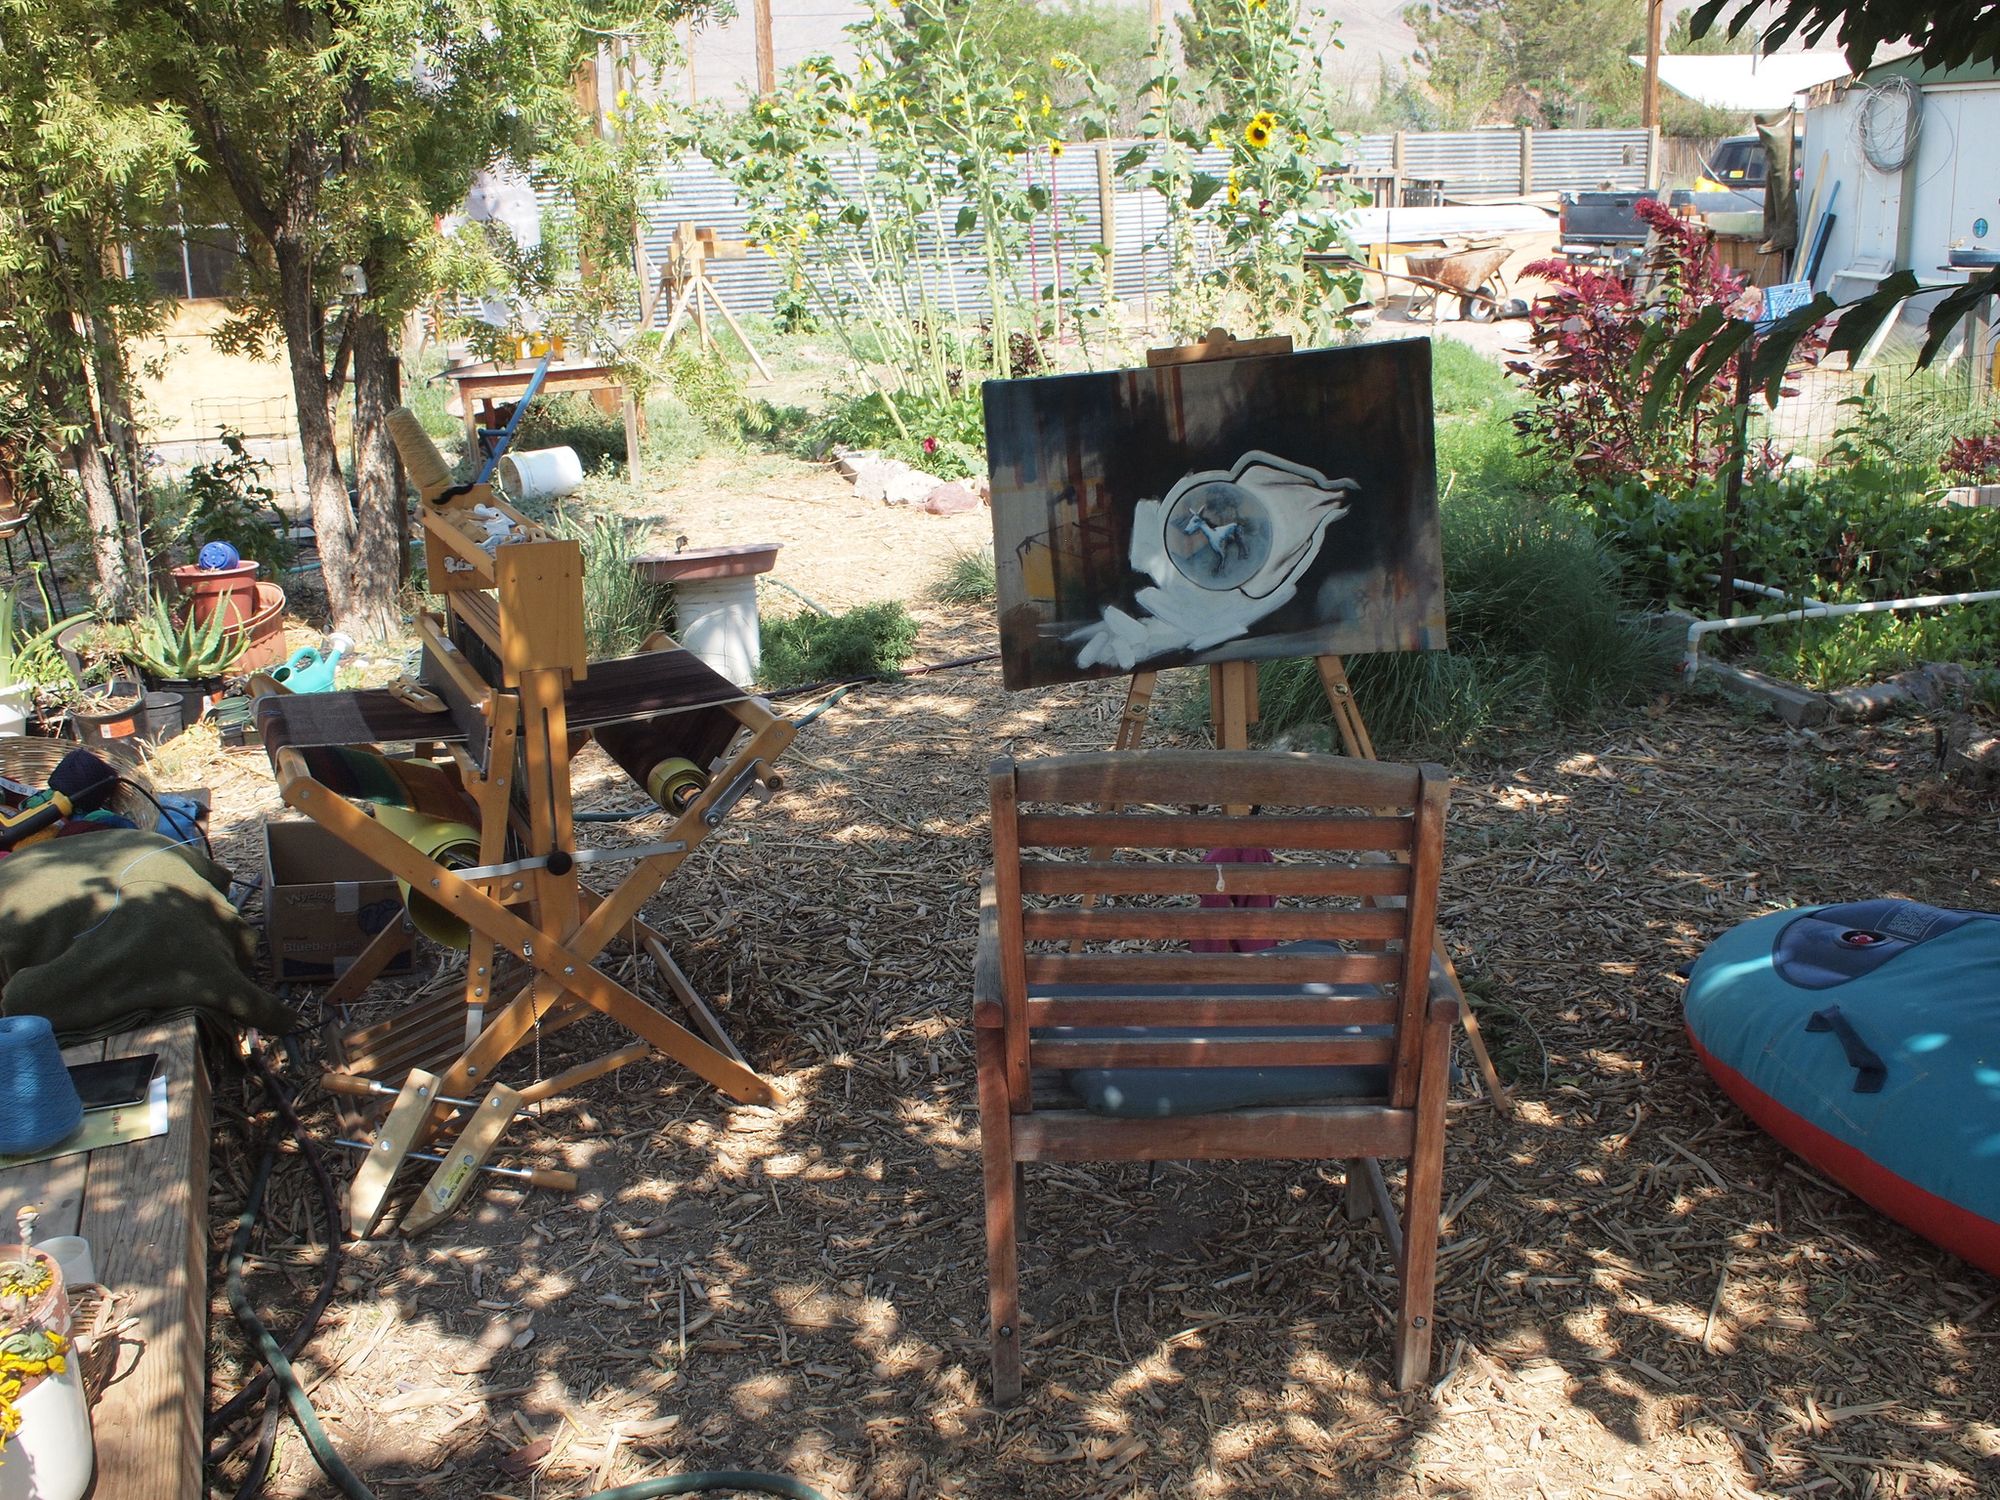 A overgrown backyard with a loom and canvas on easel setup as a workspace for artists.